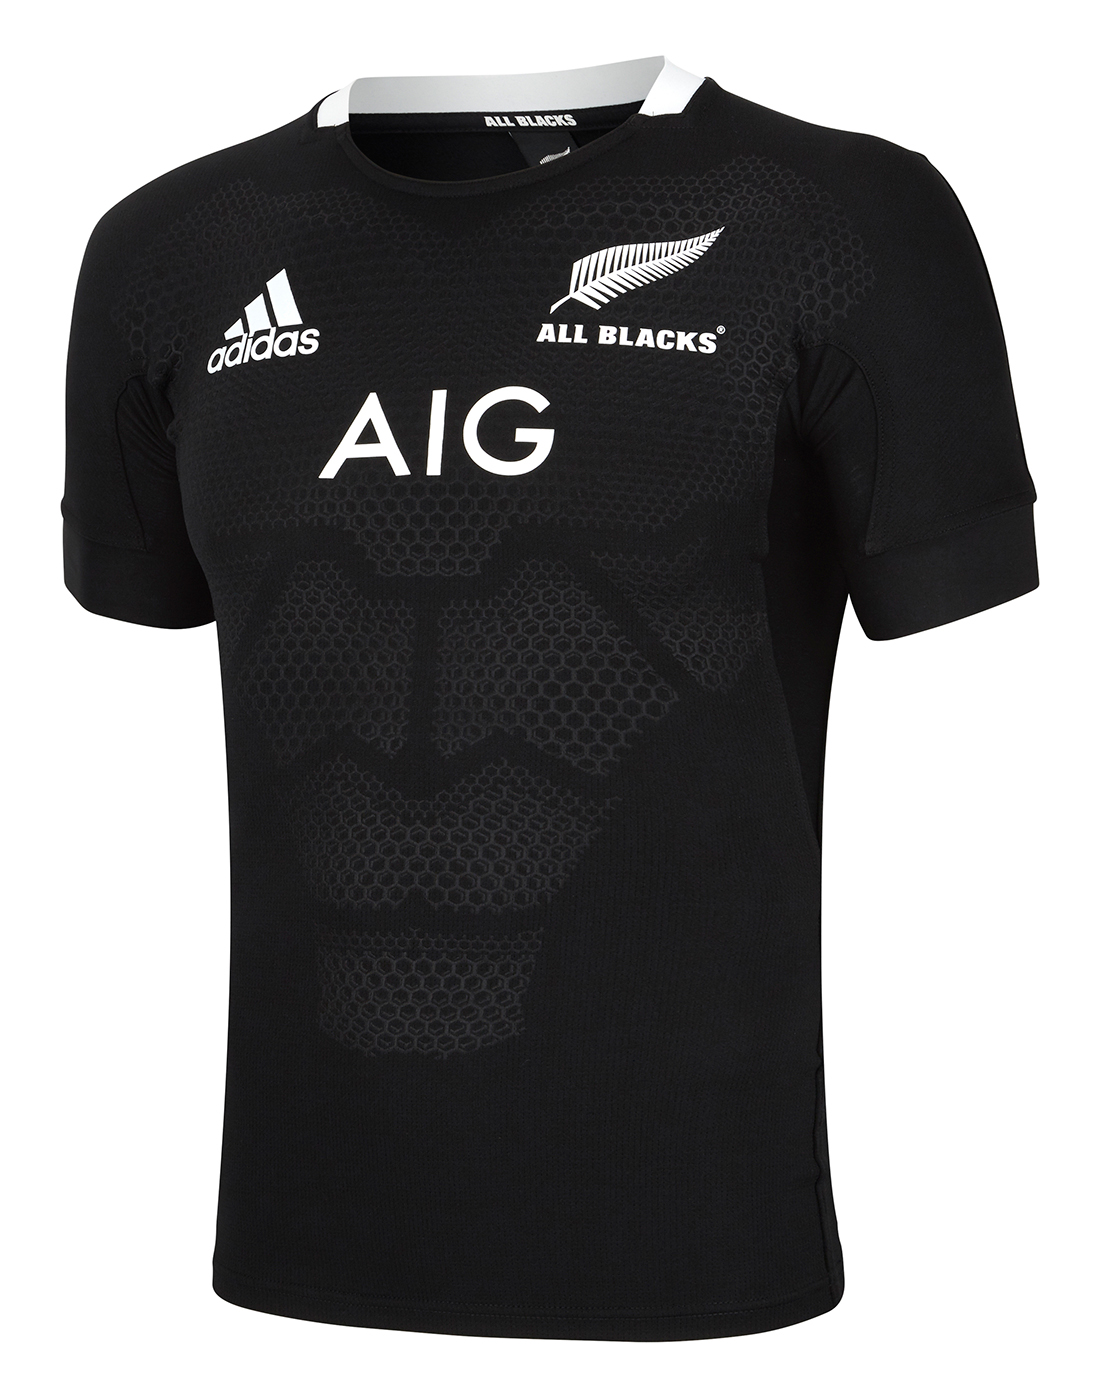 adidas Adult All Blacks Players Home Jersey - Black | Life Style Sports IE